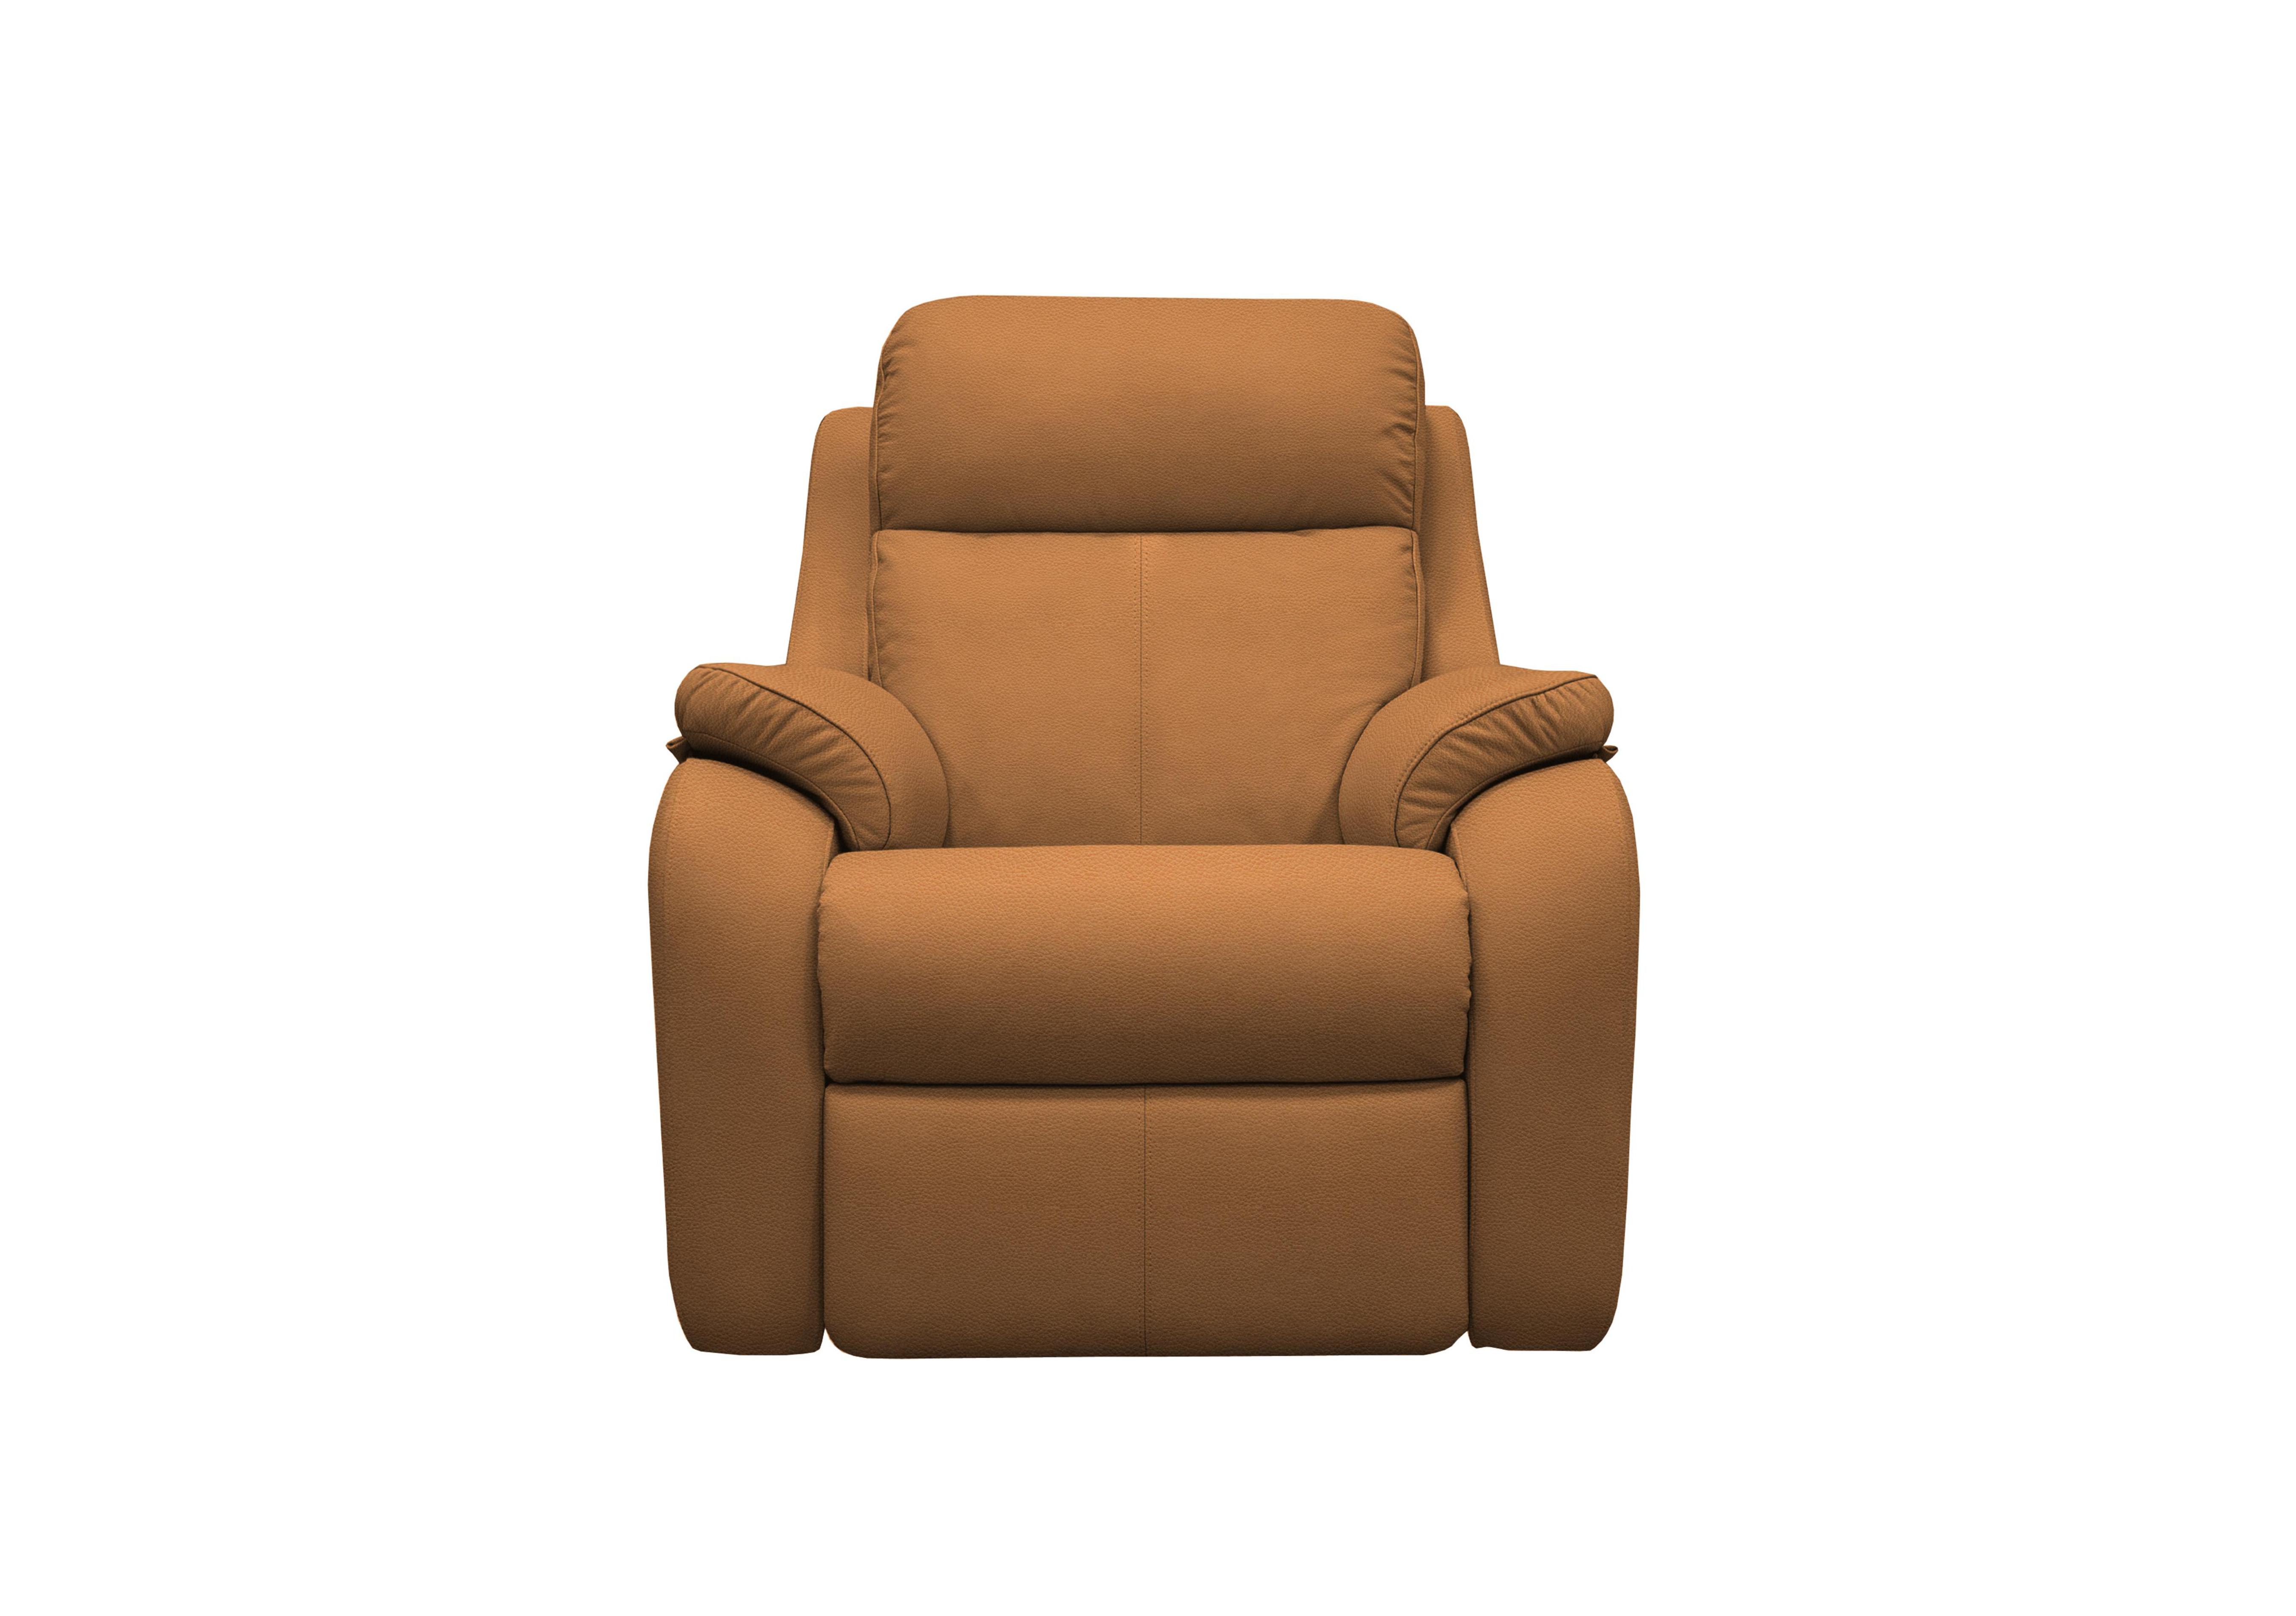 Kingsbury Leather Power Recliner Armchair with Power Headrests in L847 Cambridge Tan on Furniture Village